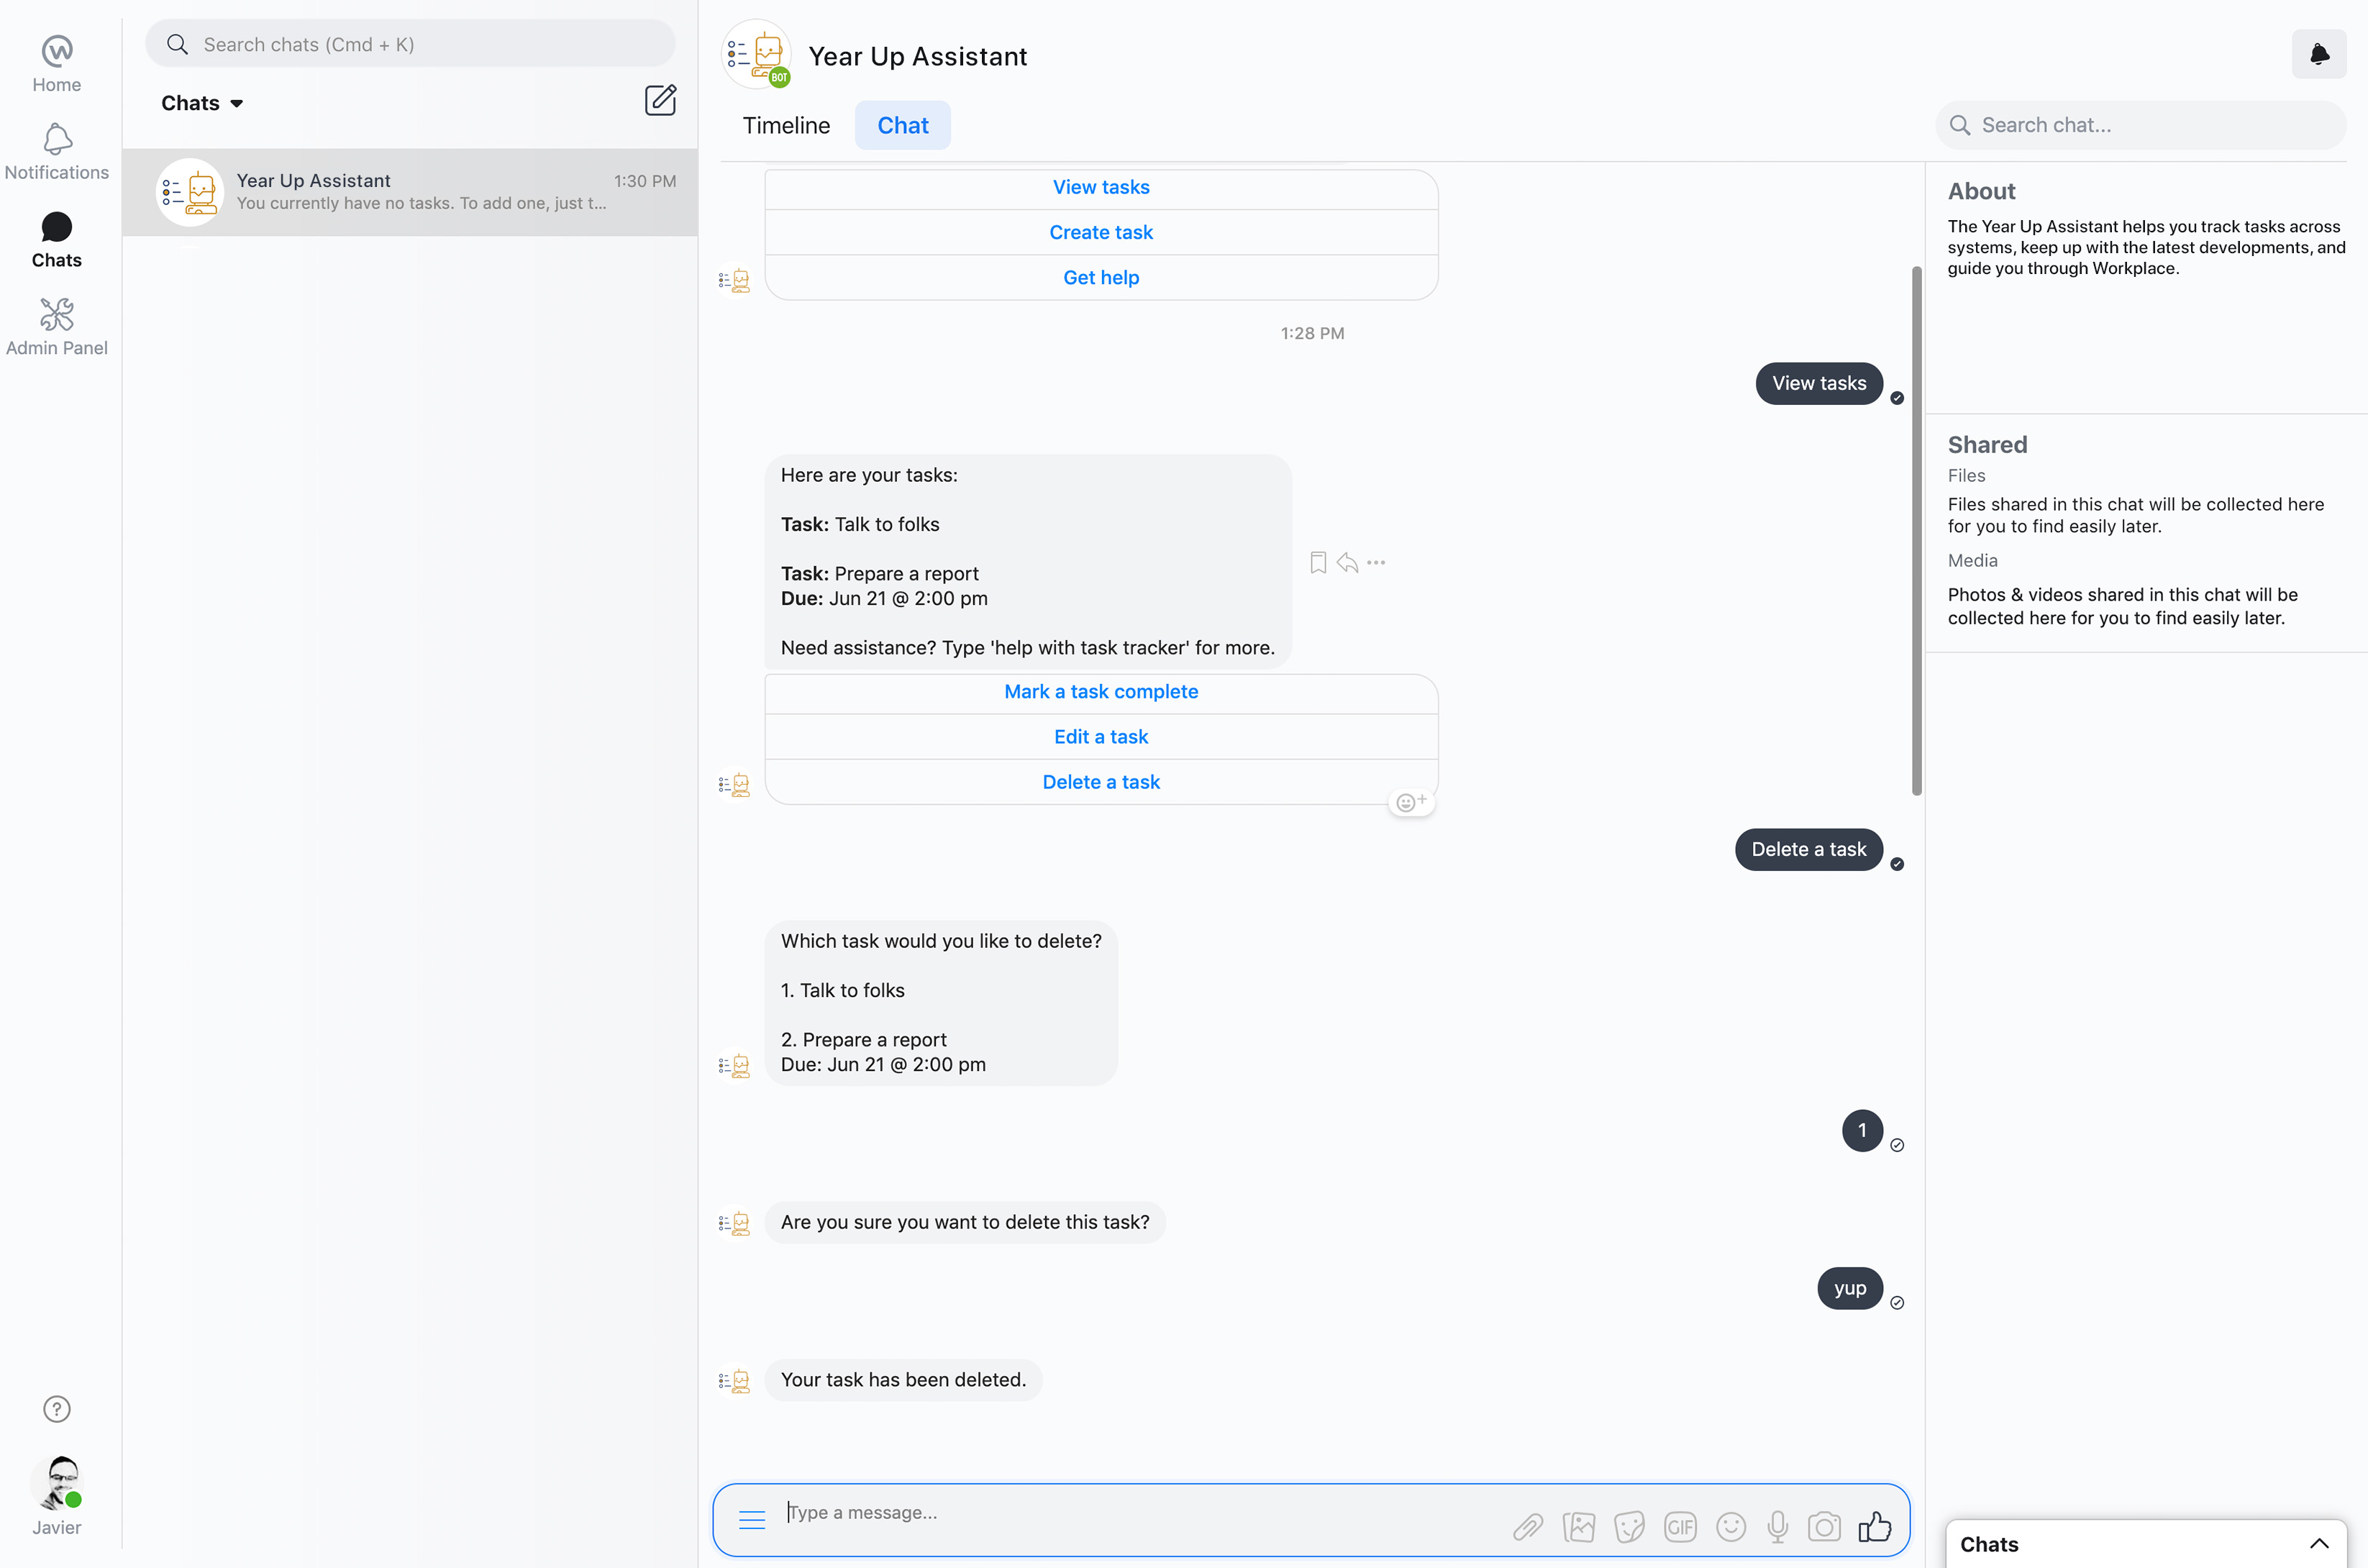 Chat with the Year Up Assistant, adding and deleting tasks for the day through a chat bot driven experience.